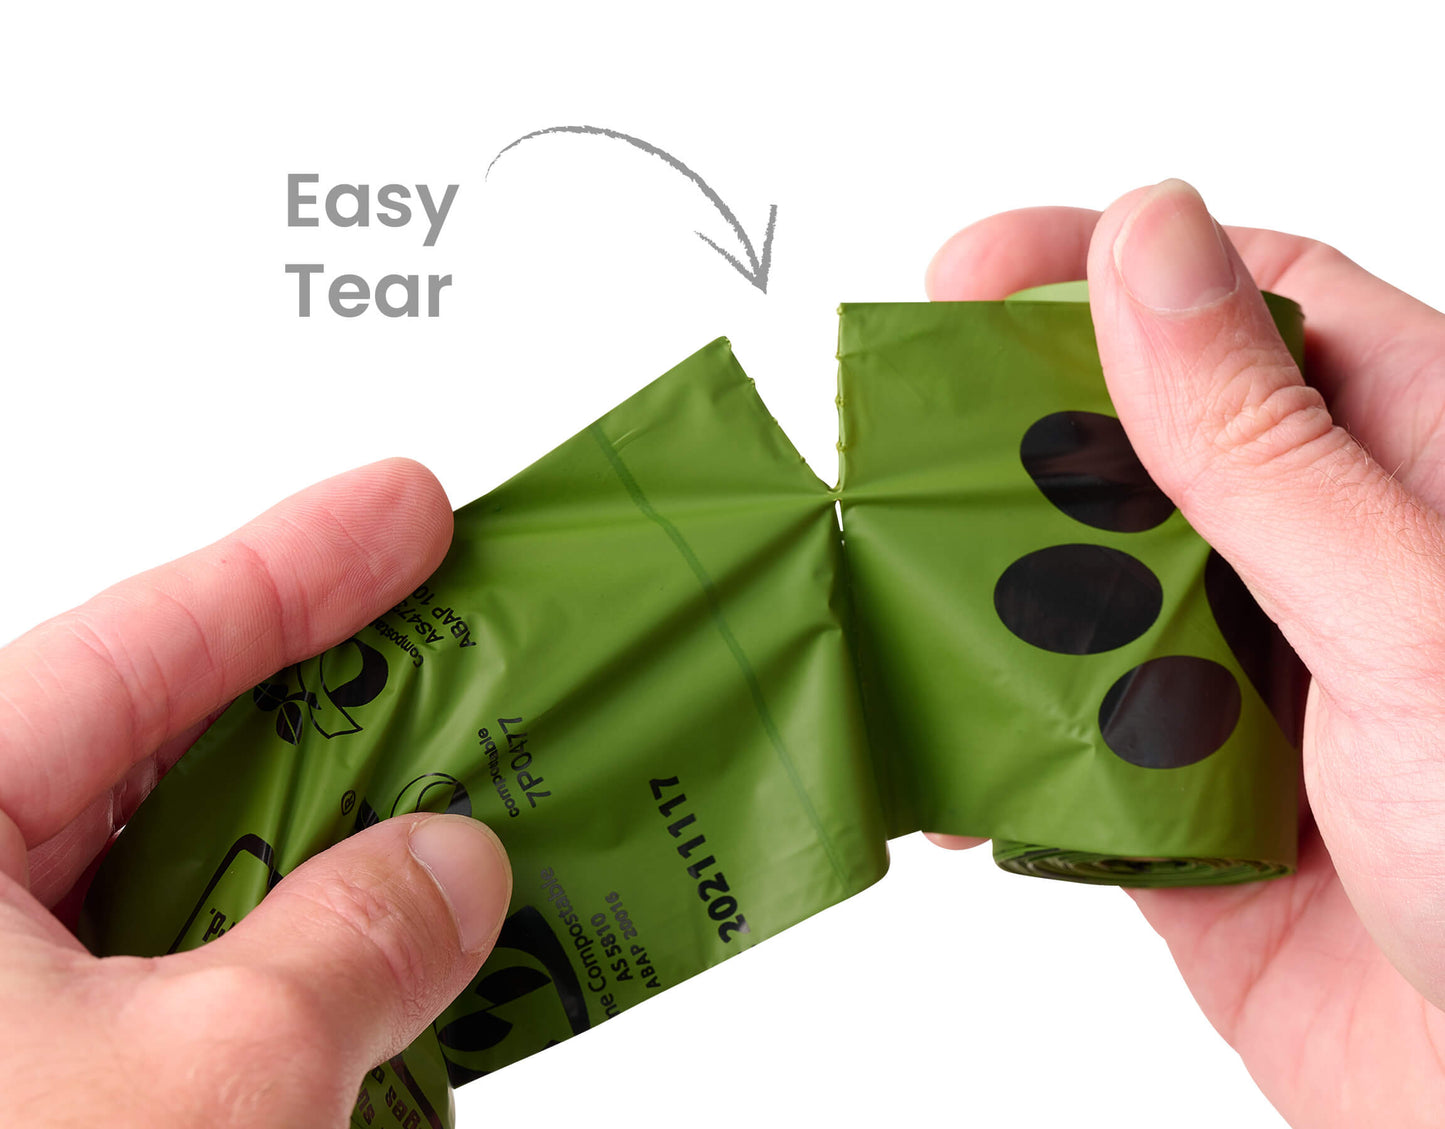 Oh Crap Compostable Dog Poop Bags